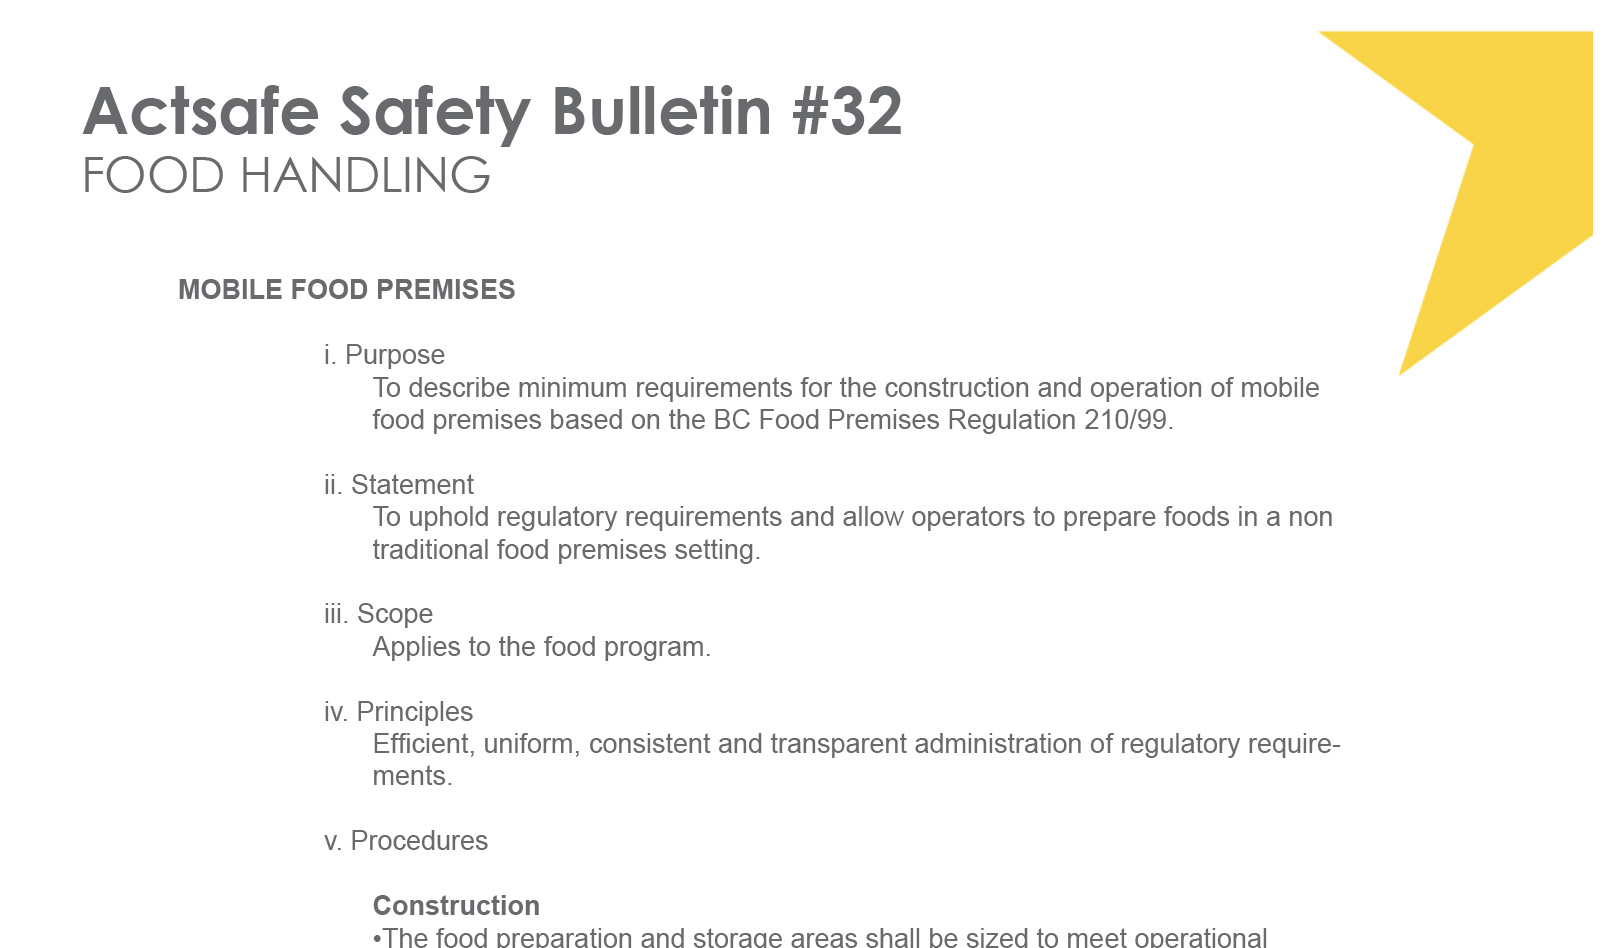 #32 Food Handling Motion Picture Safety Bulletin